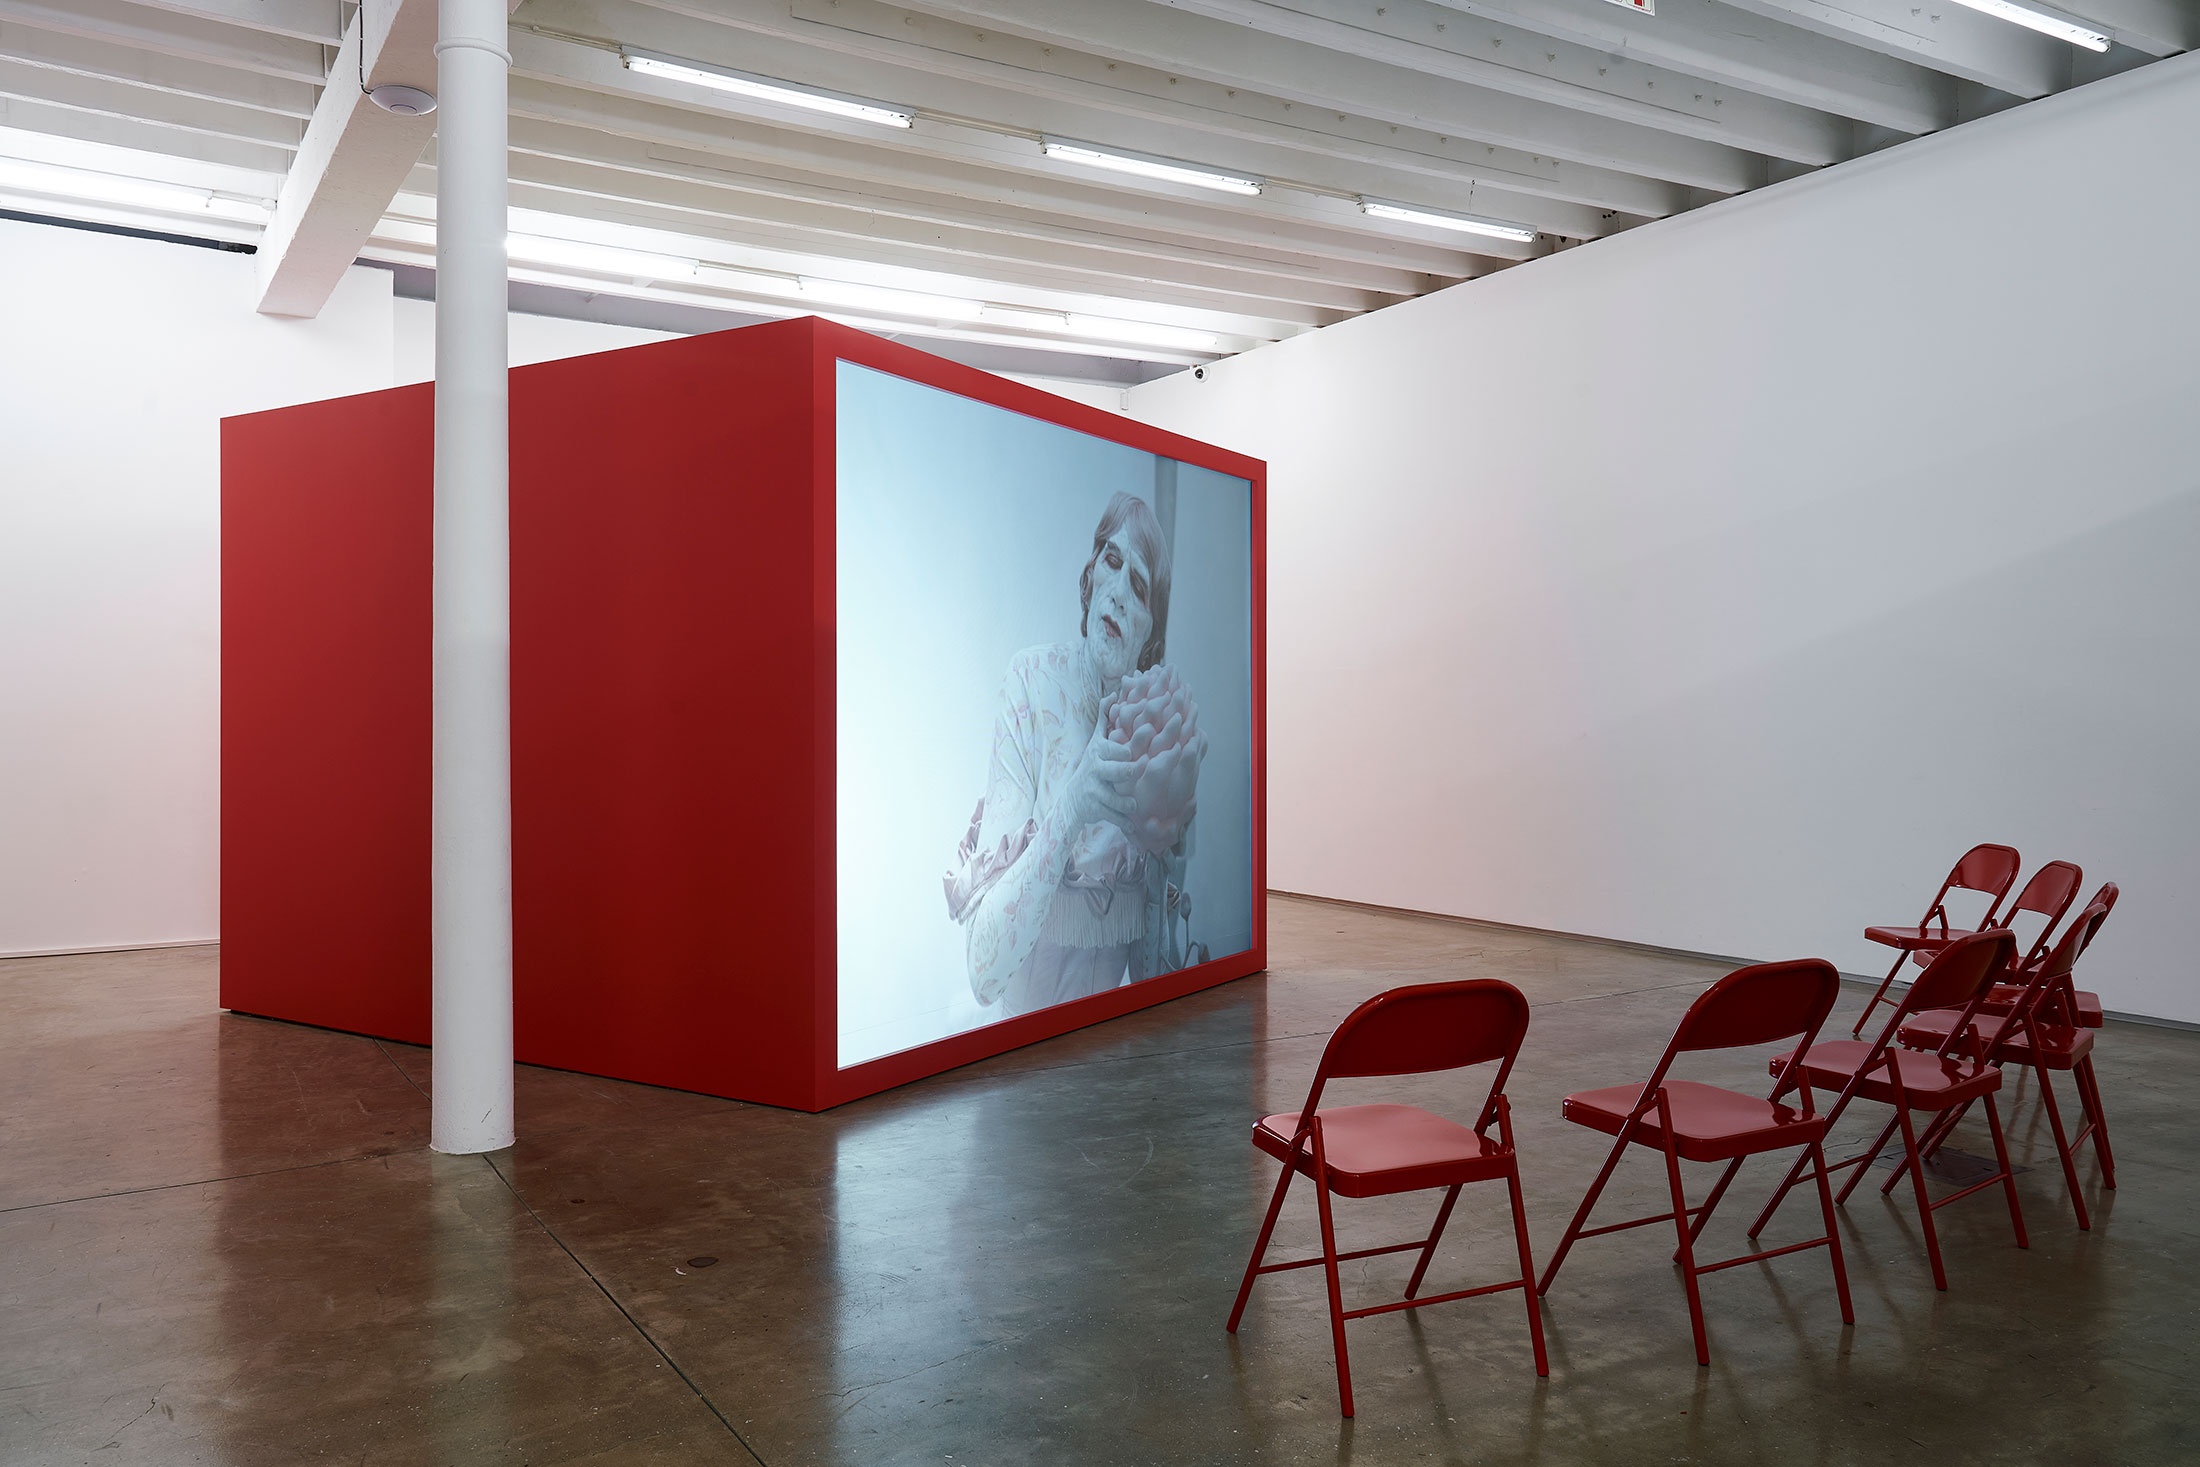 Installation photograph from the 'A Little After This' exhibition in A4 Arts Foundation's gallery that shows Alex Da Corte's video installation 'ROY G BIV'. On the left, a large red wooden box with a back-projected screen plays Da Corte's video. On the right, 7 red powder-coated viewing chairs are arranged in an arch.
